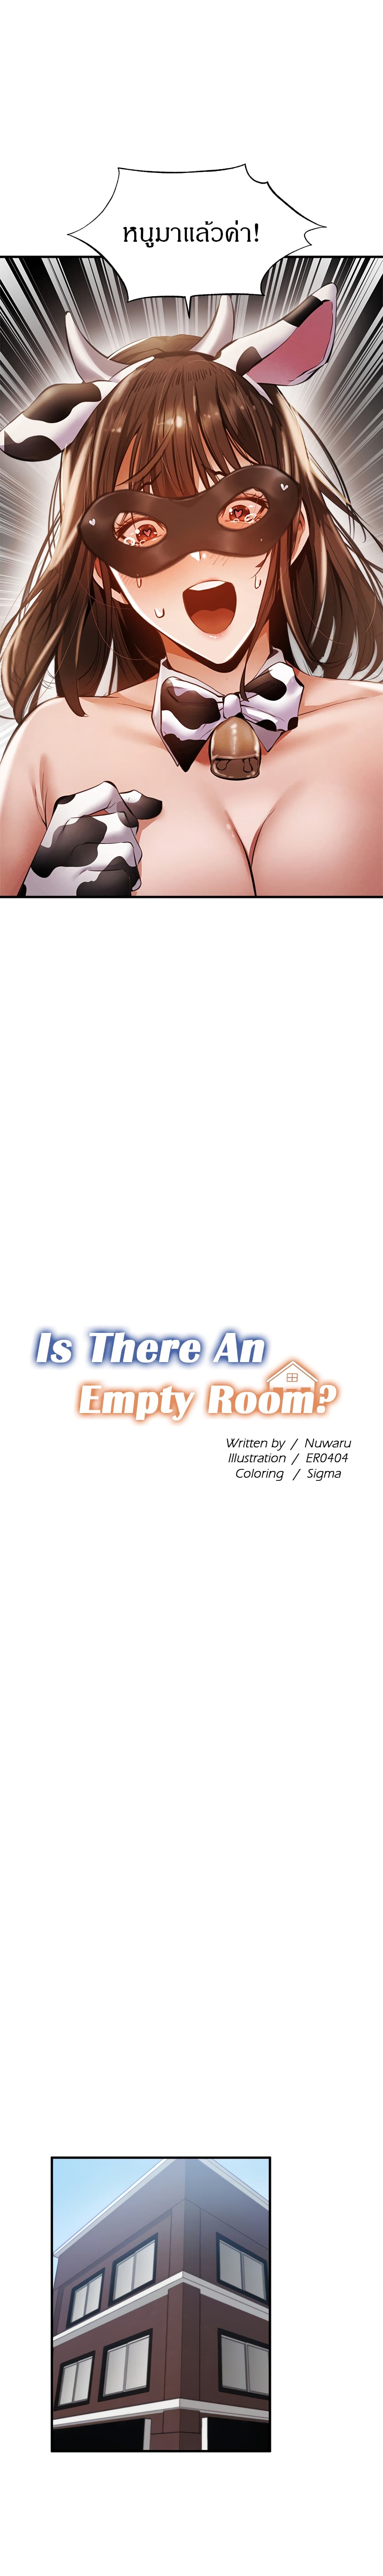 Is There an Empty Room 43 (3)